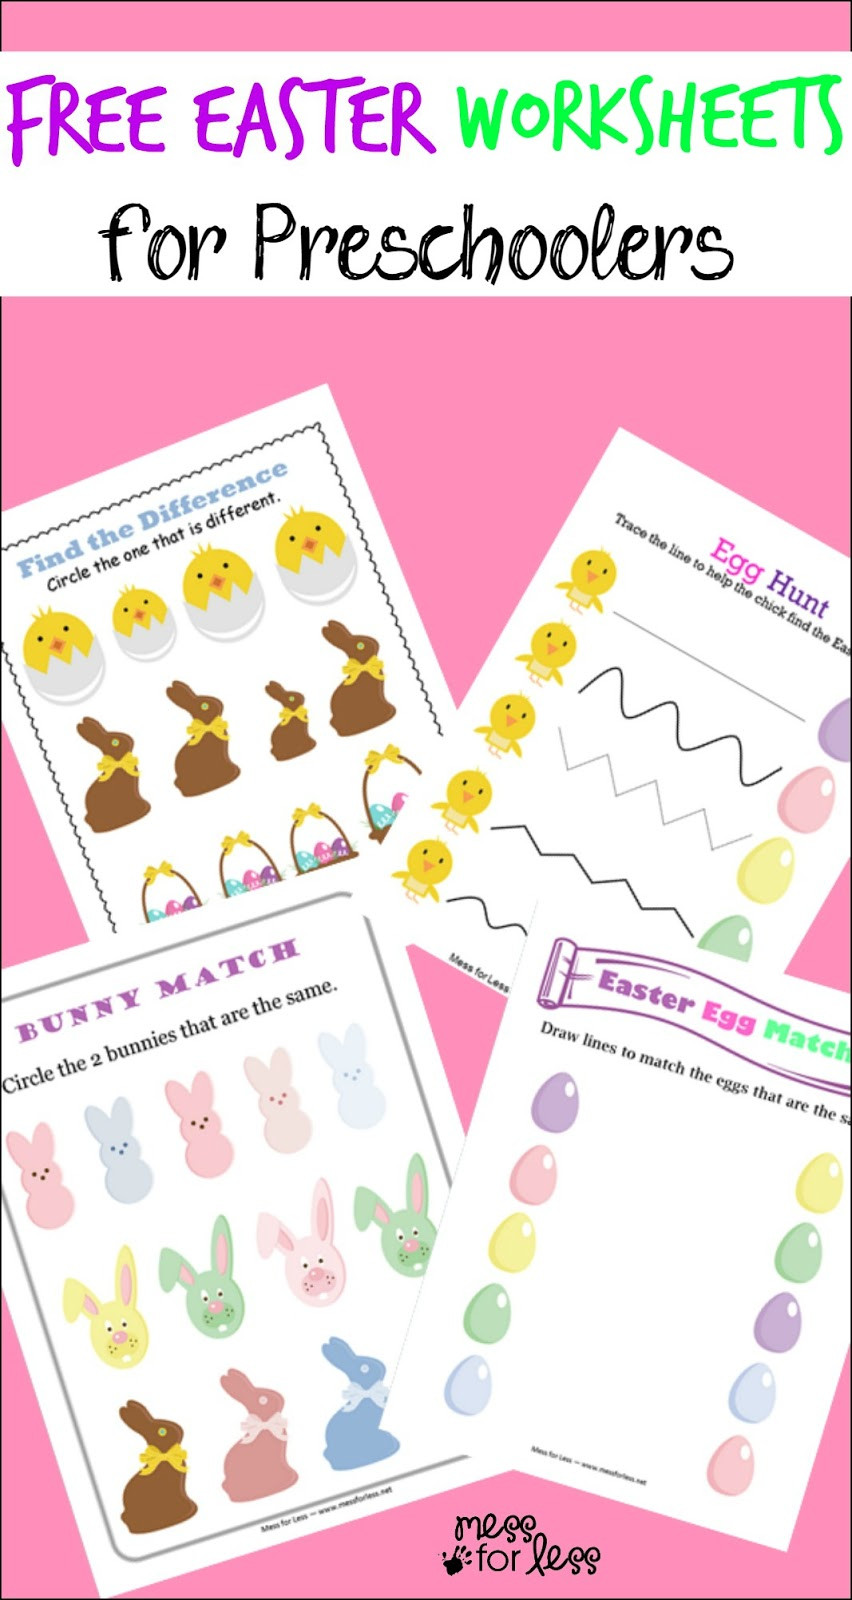 Printable Crafts For Preschoolers
 Free Easter Preschool Worksheets Mess for Less